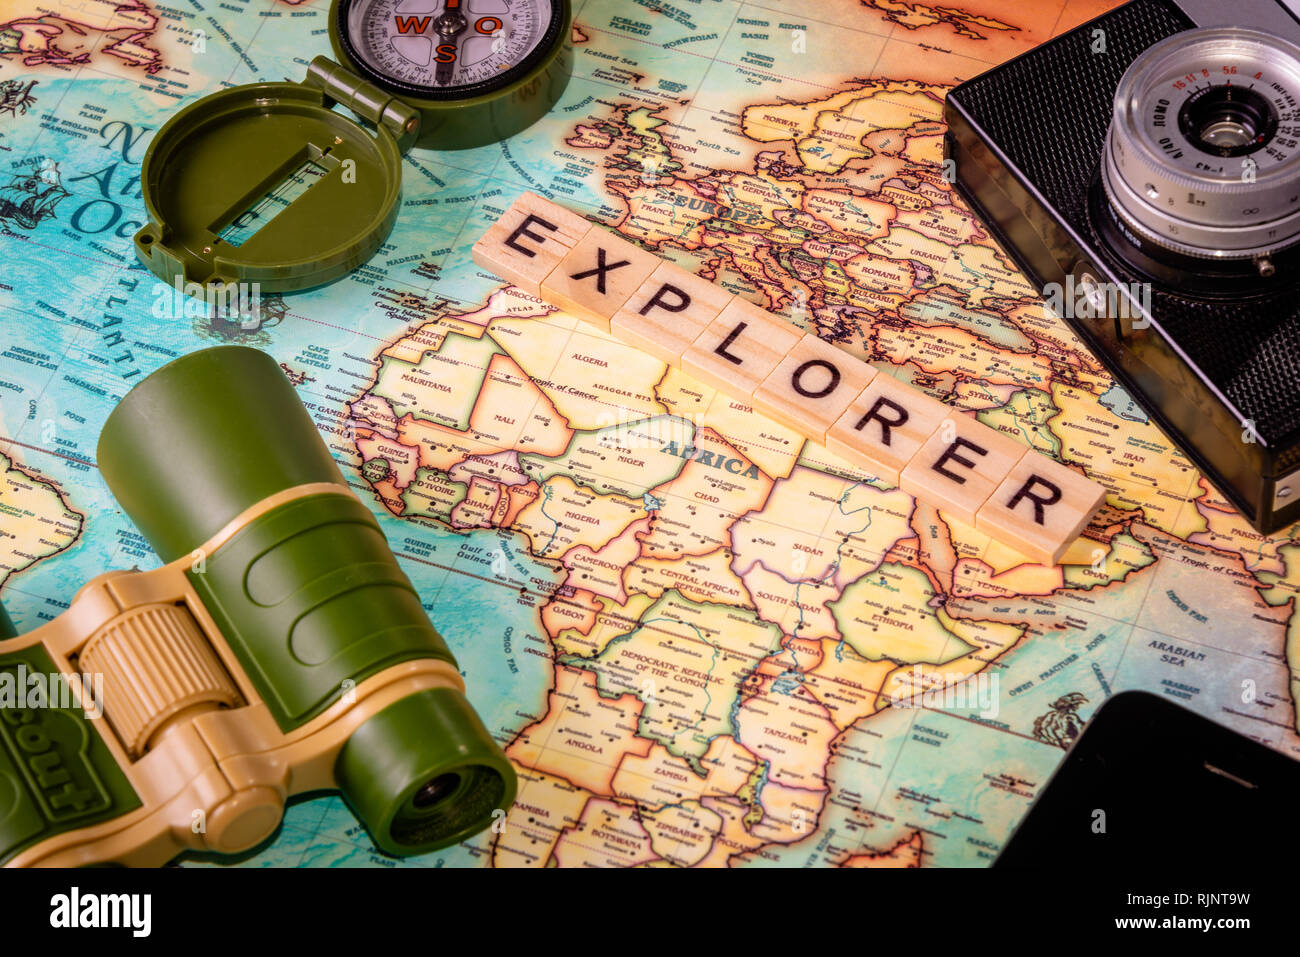 Map of Africa and Europe and travel technology accessories Stock Photo